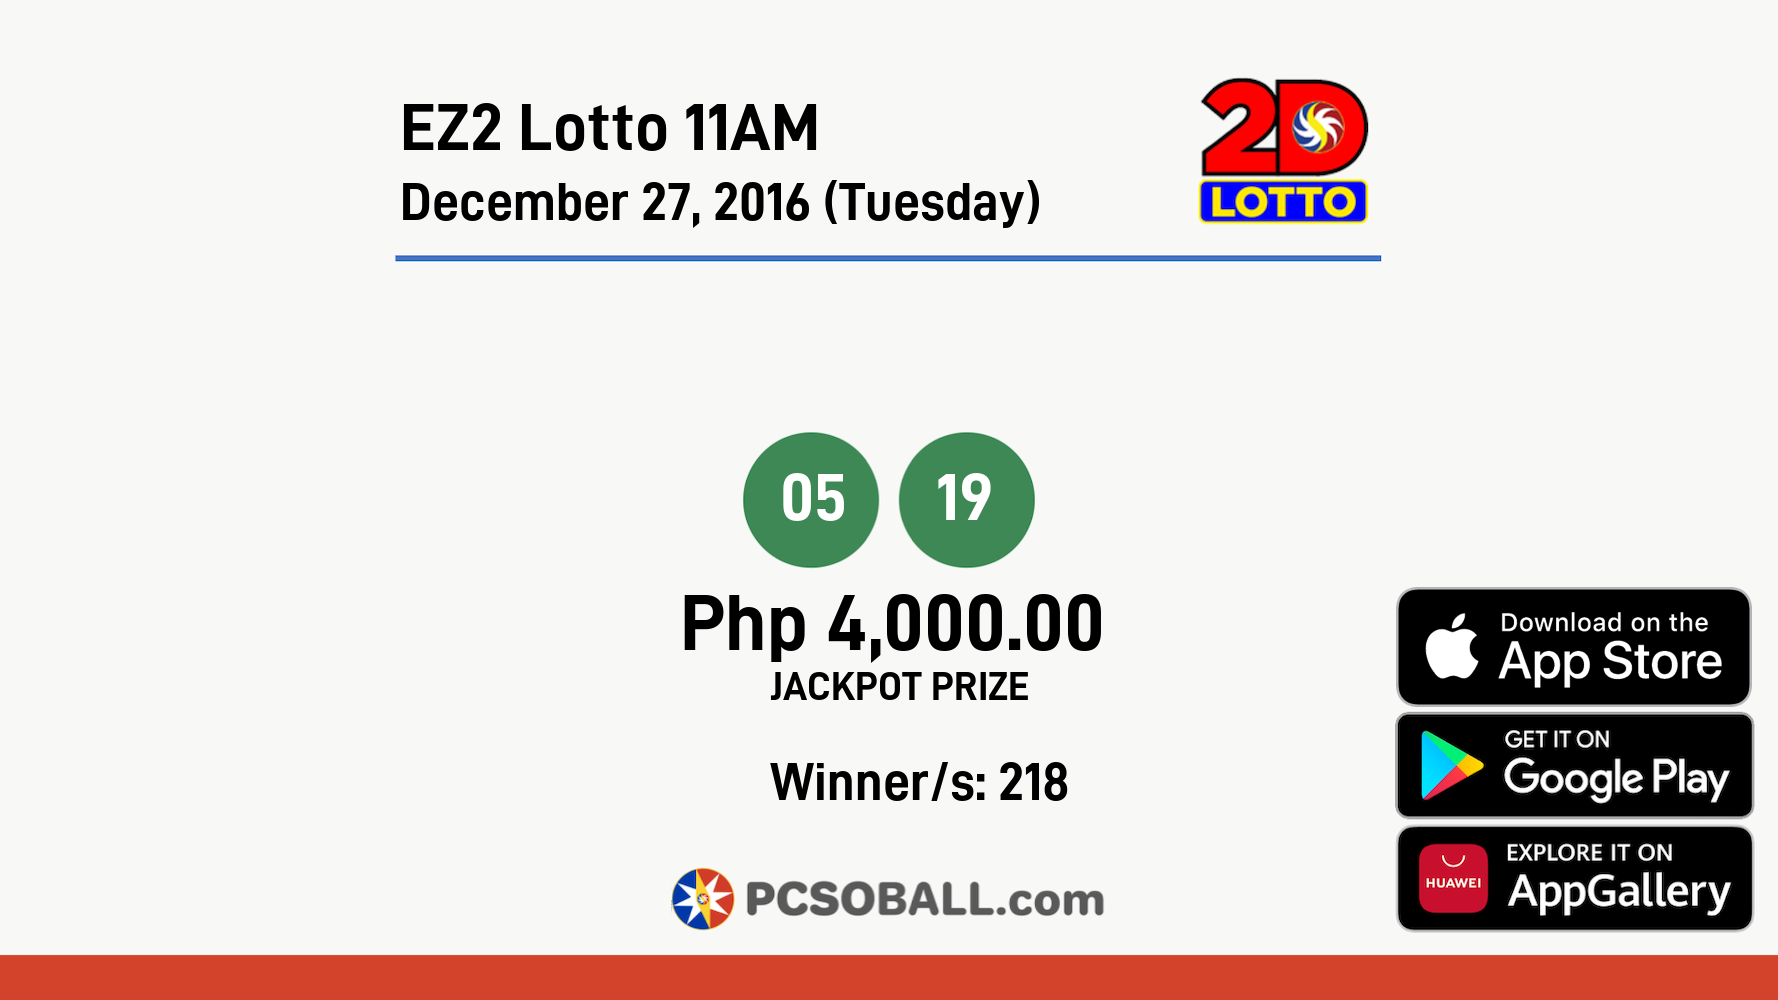 EZ2 Lotto 11AM December 27, 2016 (Tuesday) Result